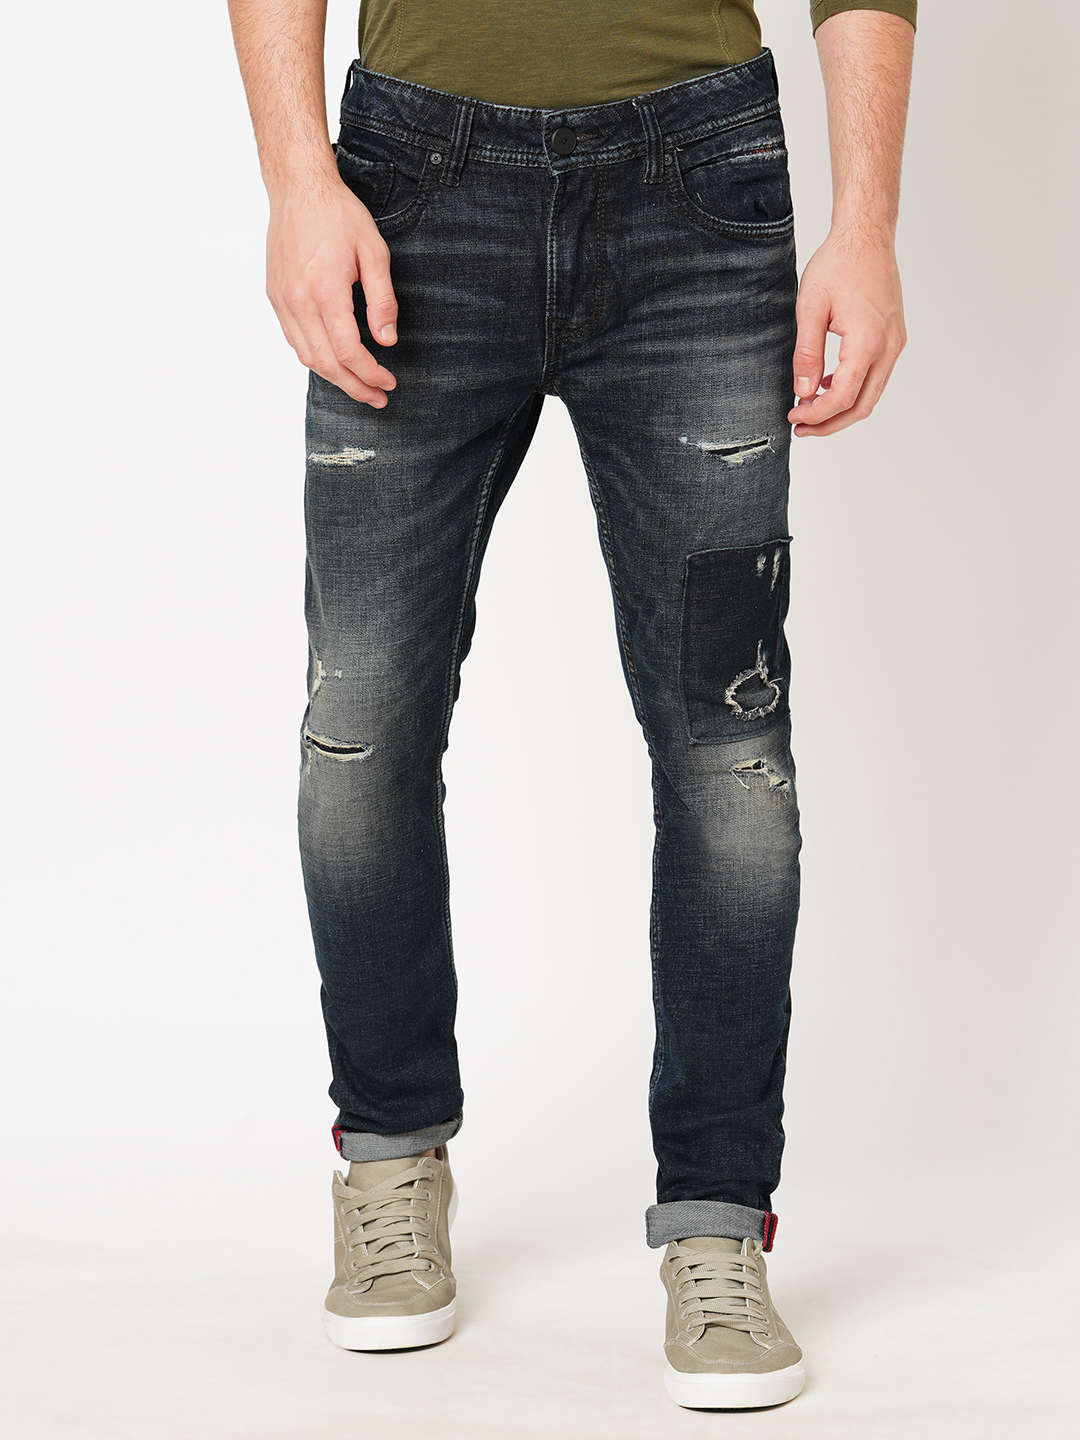 DK BLUE 5 POCKET MID-RISE NARROW TAPERED FIT JEANS (BILLY FIT)